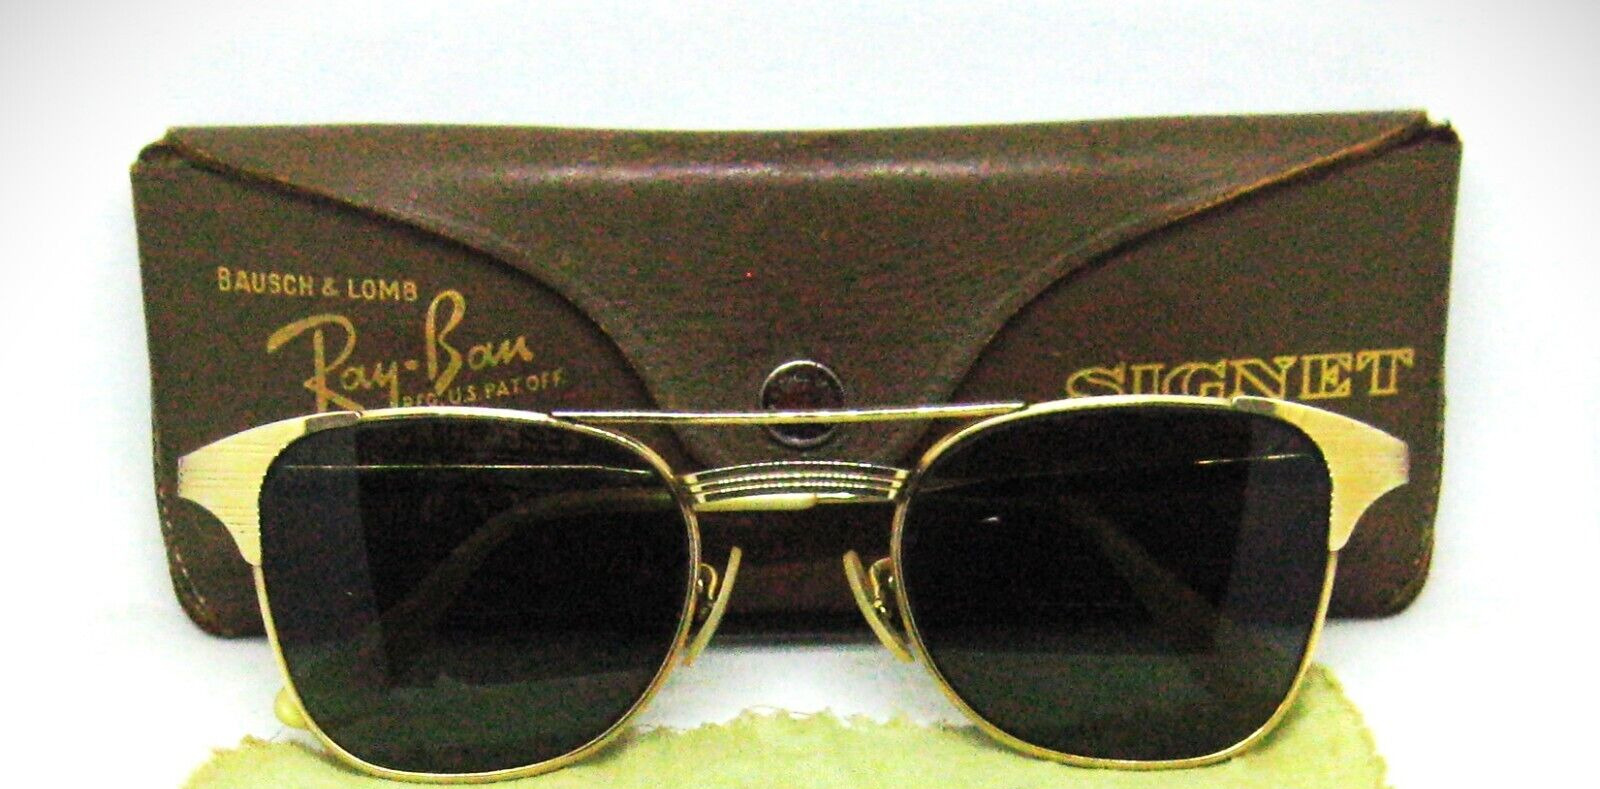 Ray-Ban USA Vintage 1940s B&L Signet 12kGF Classic Metals Sunglasses Frame &Case